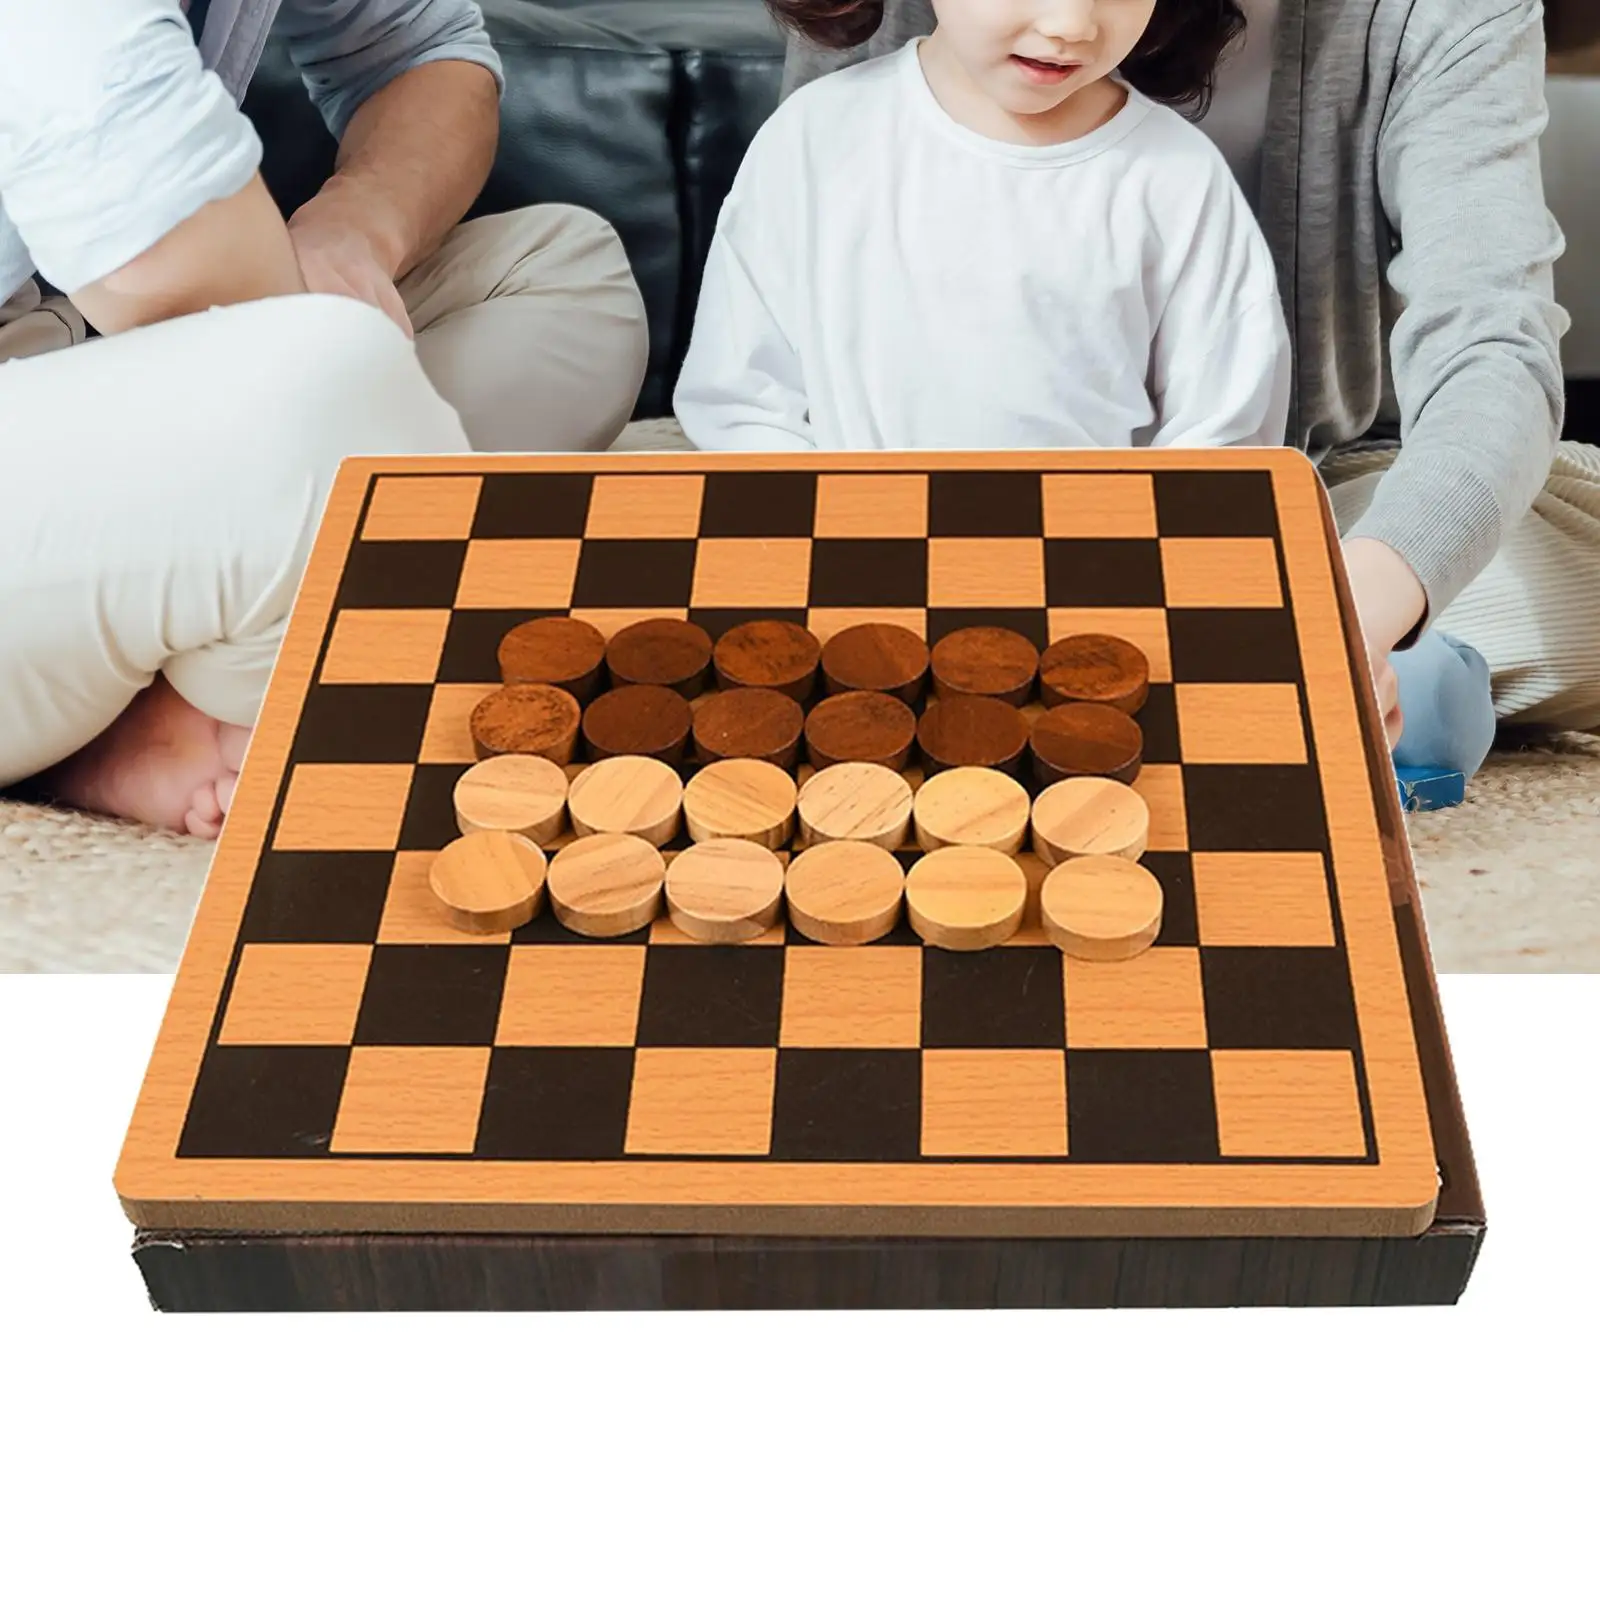 International Chess Game Set Decorative Chess Pieces Retro Style Puzzle Chess Figurine Wood for Children Kids Tabletop Travel